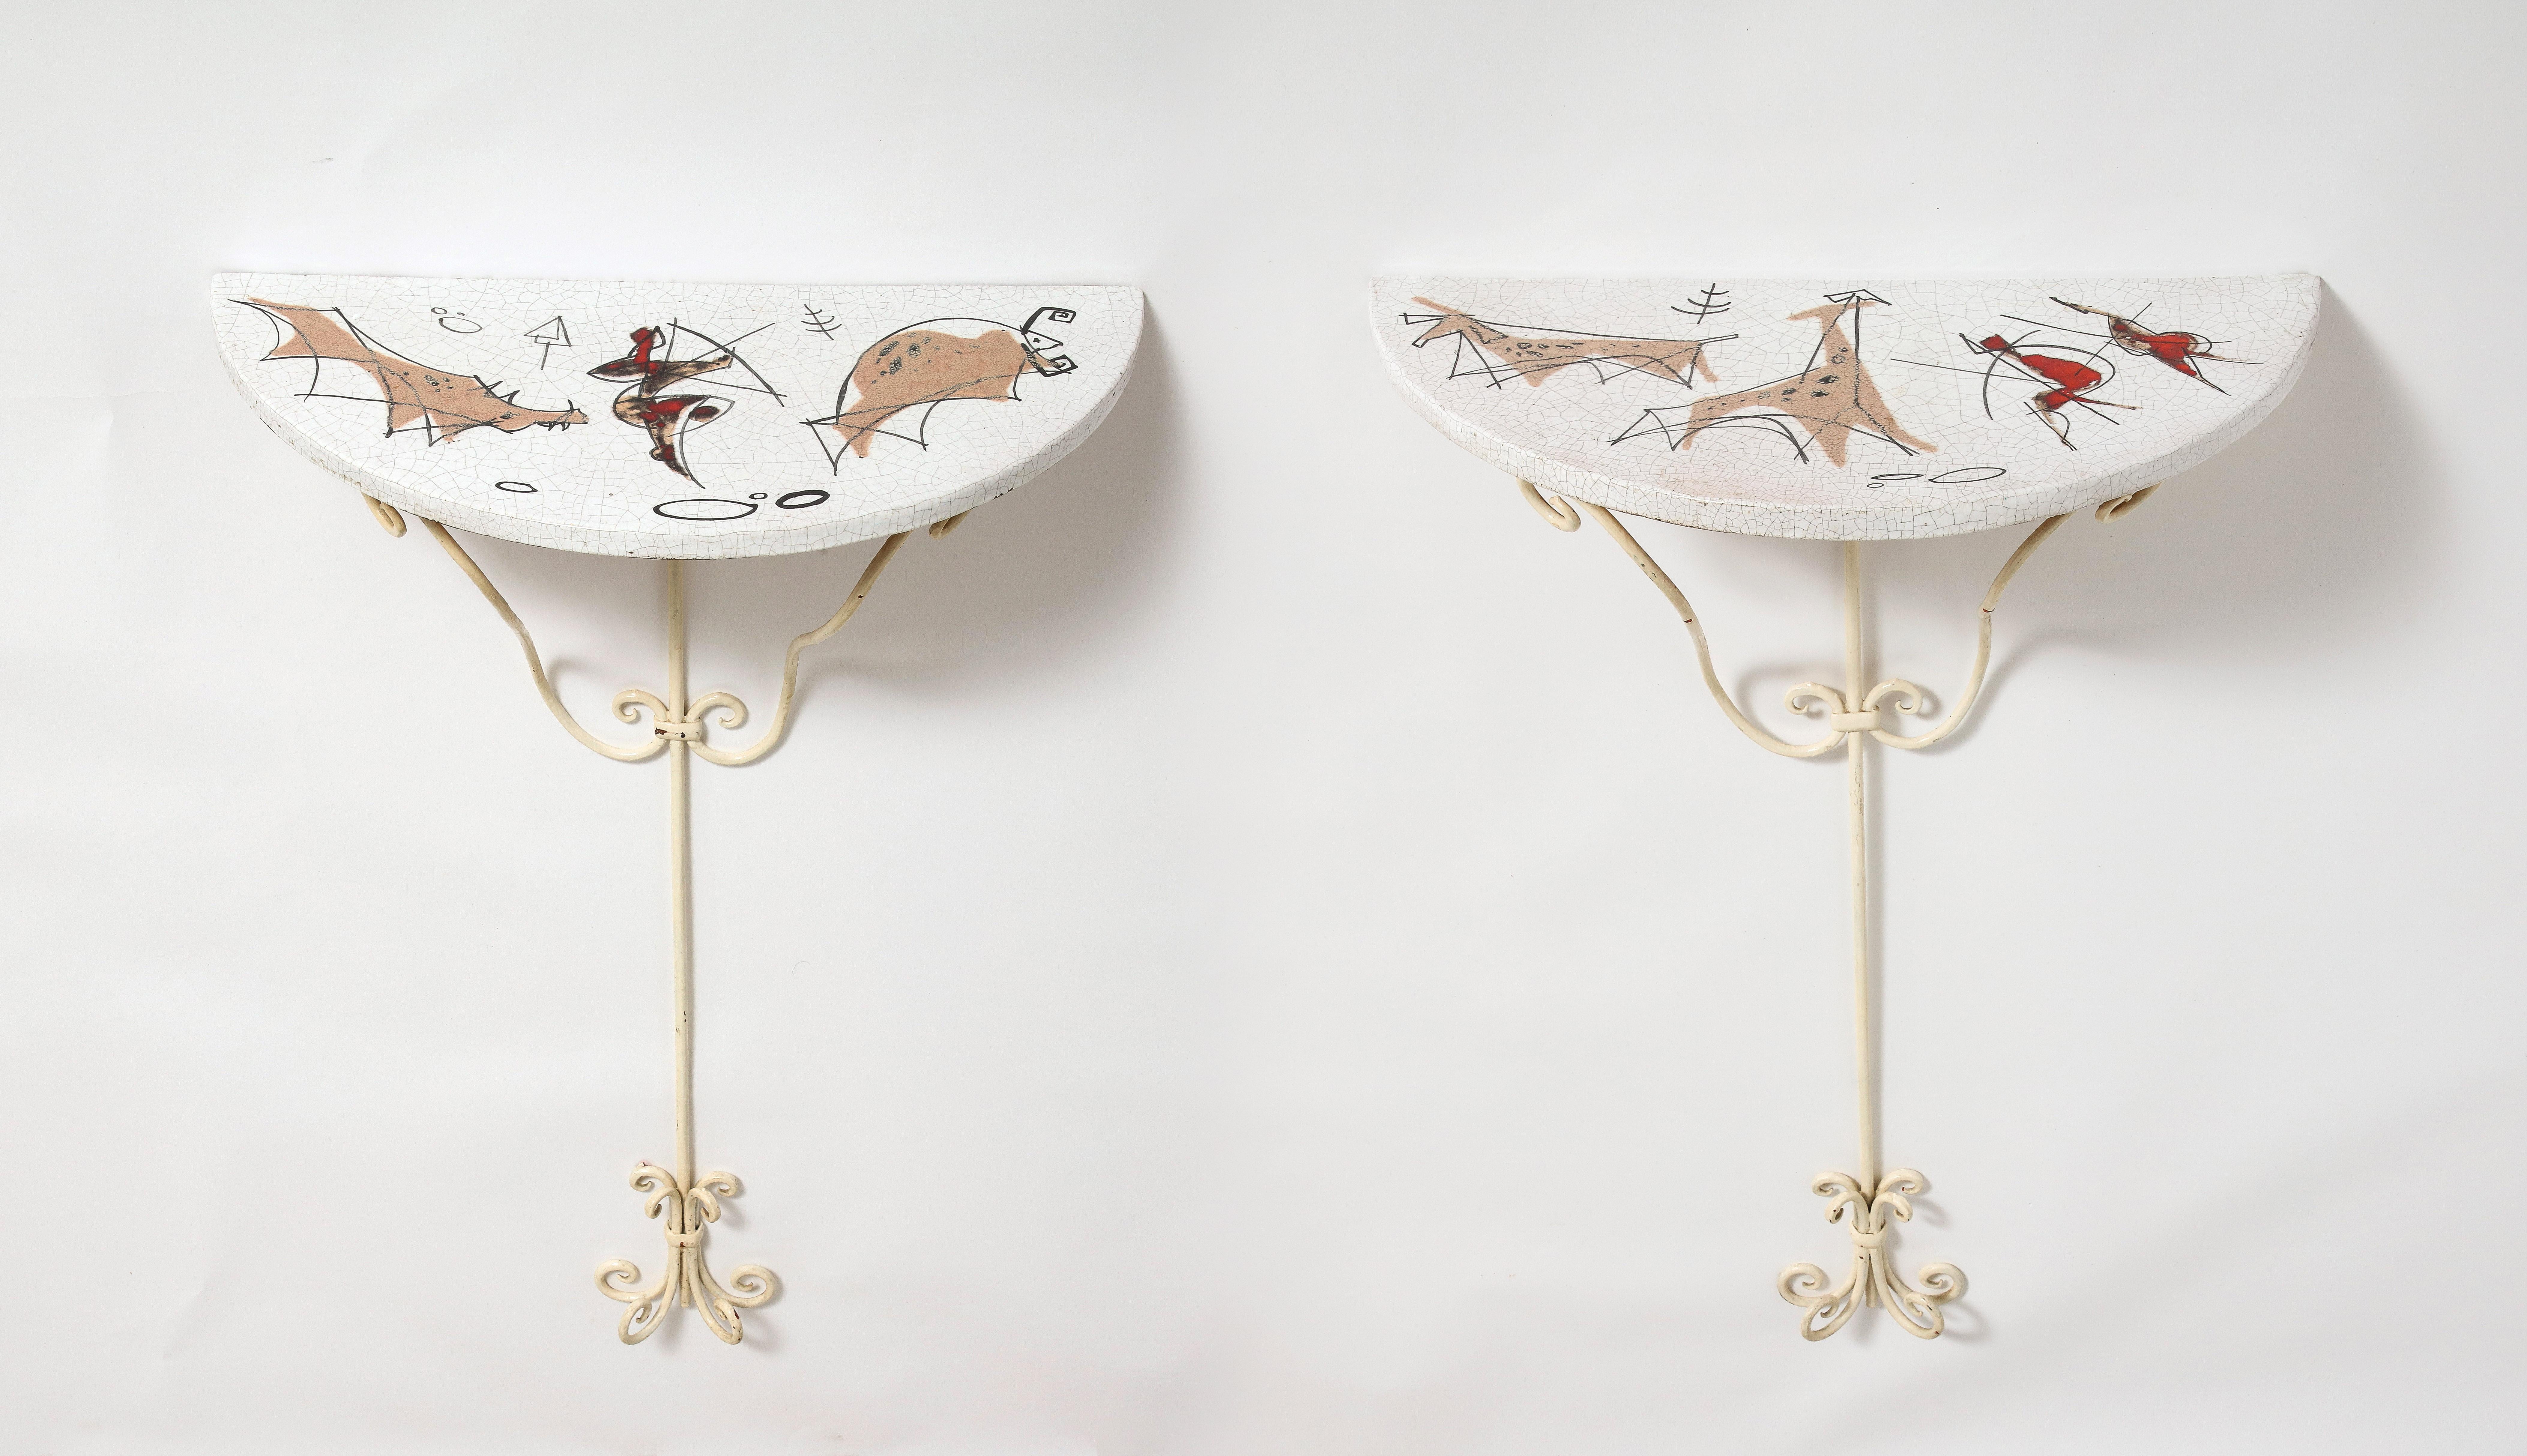 Arnaldo Miniati Pair of Ceramic and Iron Demi-Lune Wall Consoles, Italy, 1959 For Sale 4